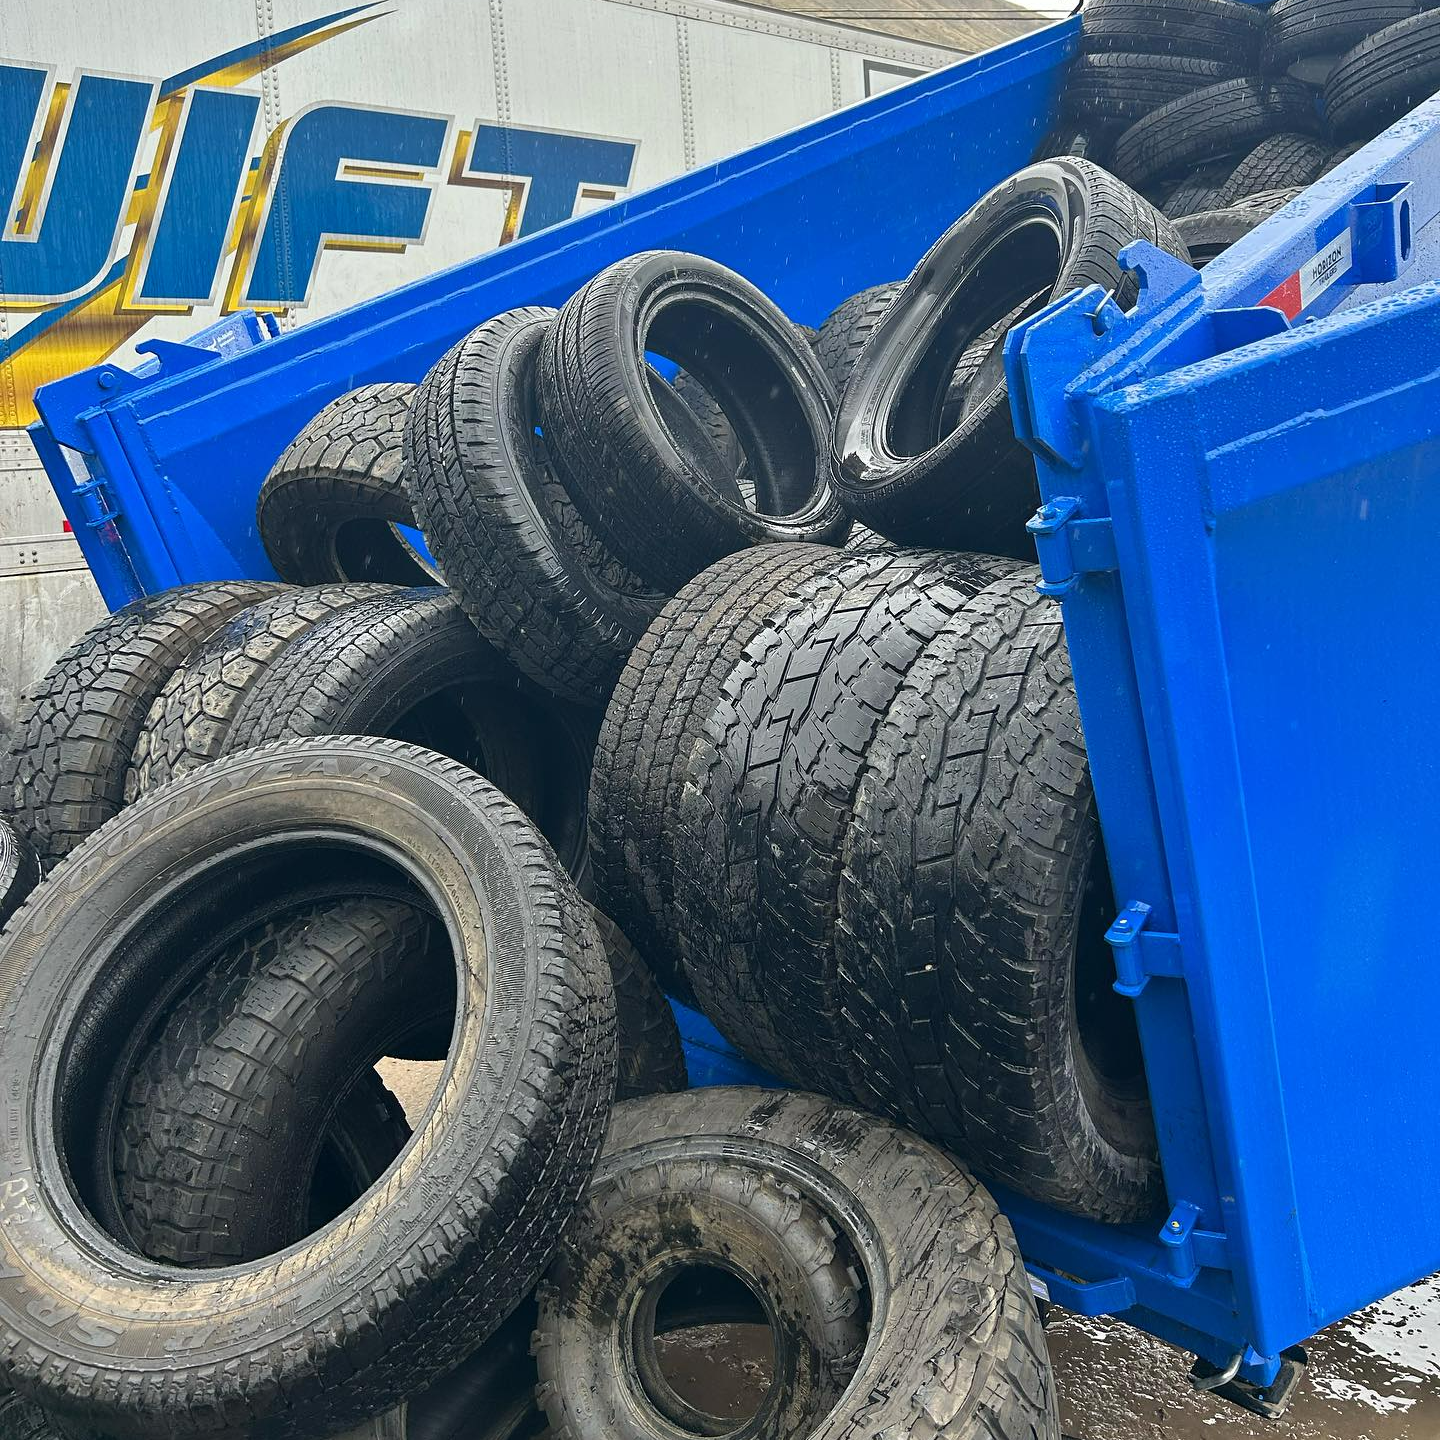 Dumpster Filled With Tires - Bluffdale, UT - Trash Panda Disposal